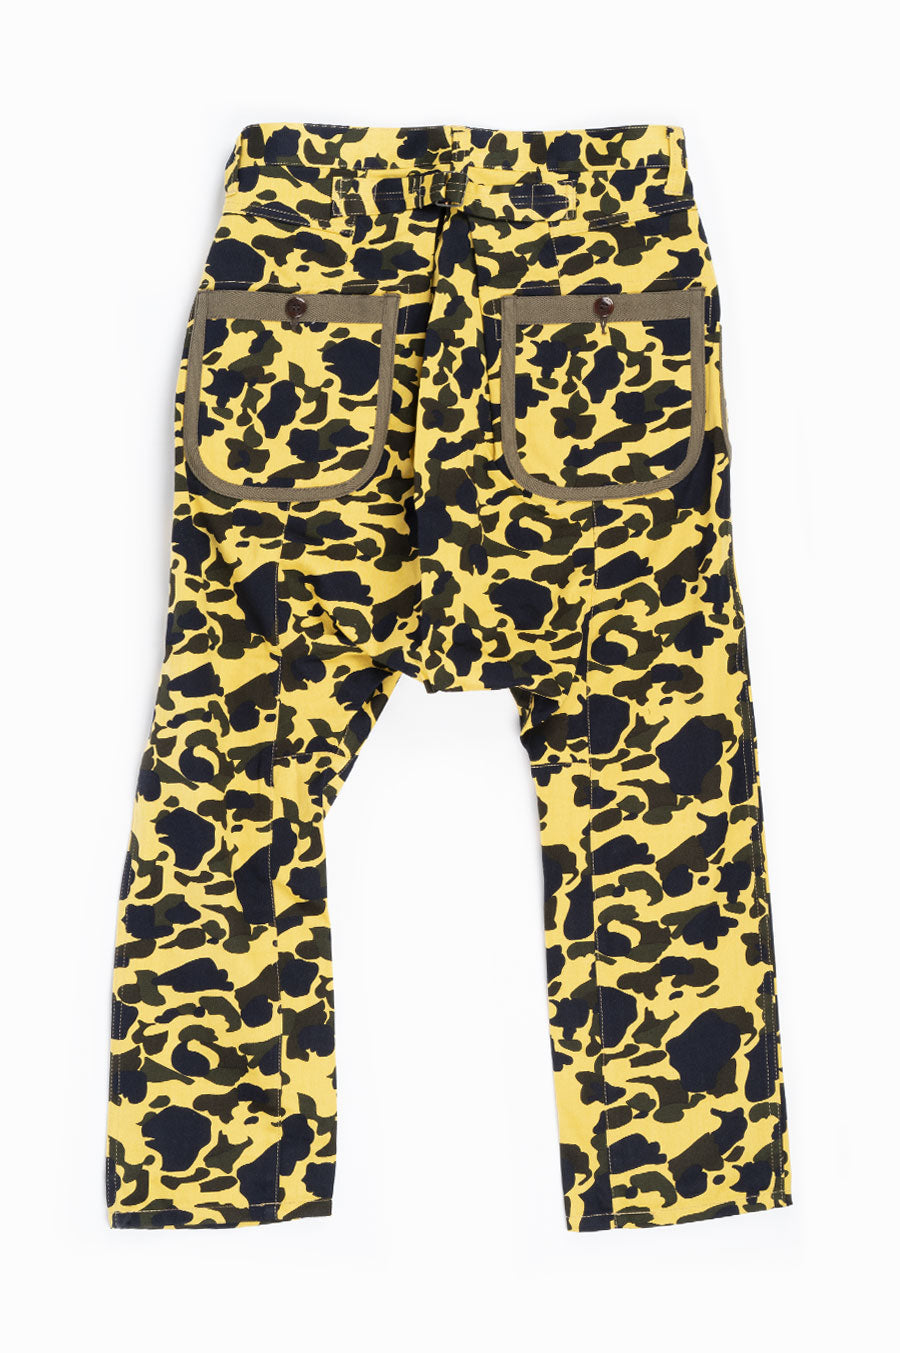 Tactical Camouflage BDU Pants  Yellow